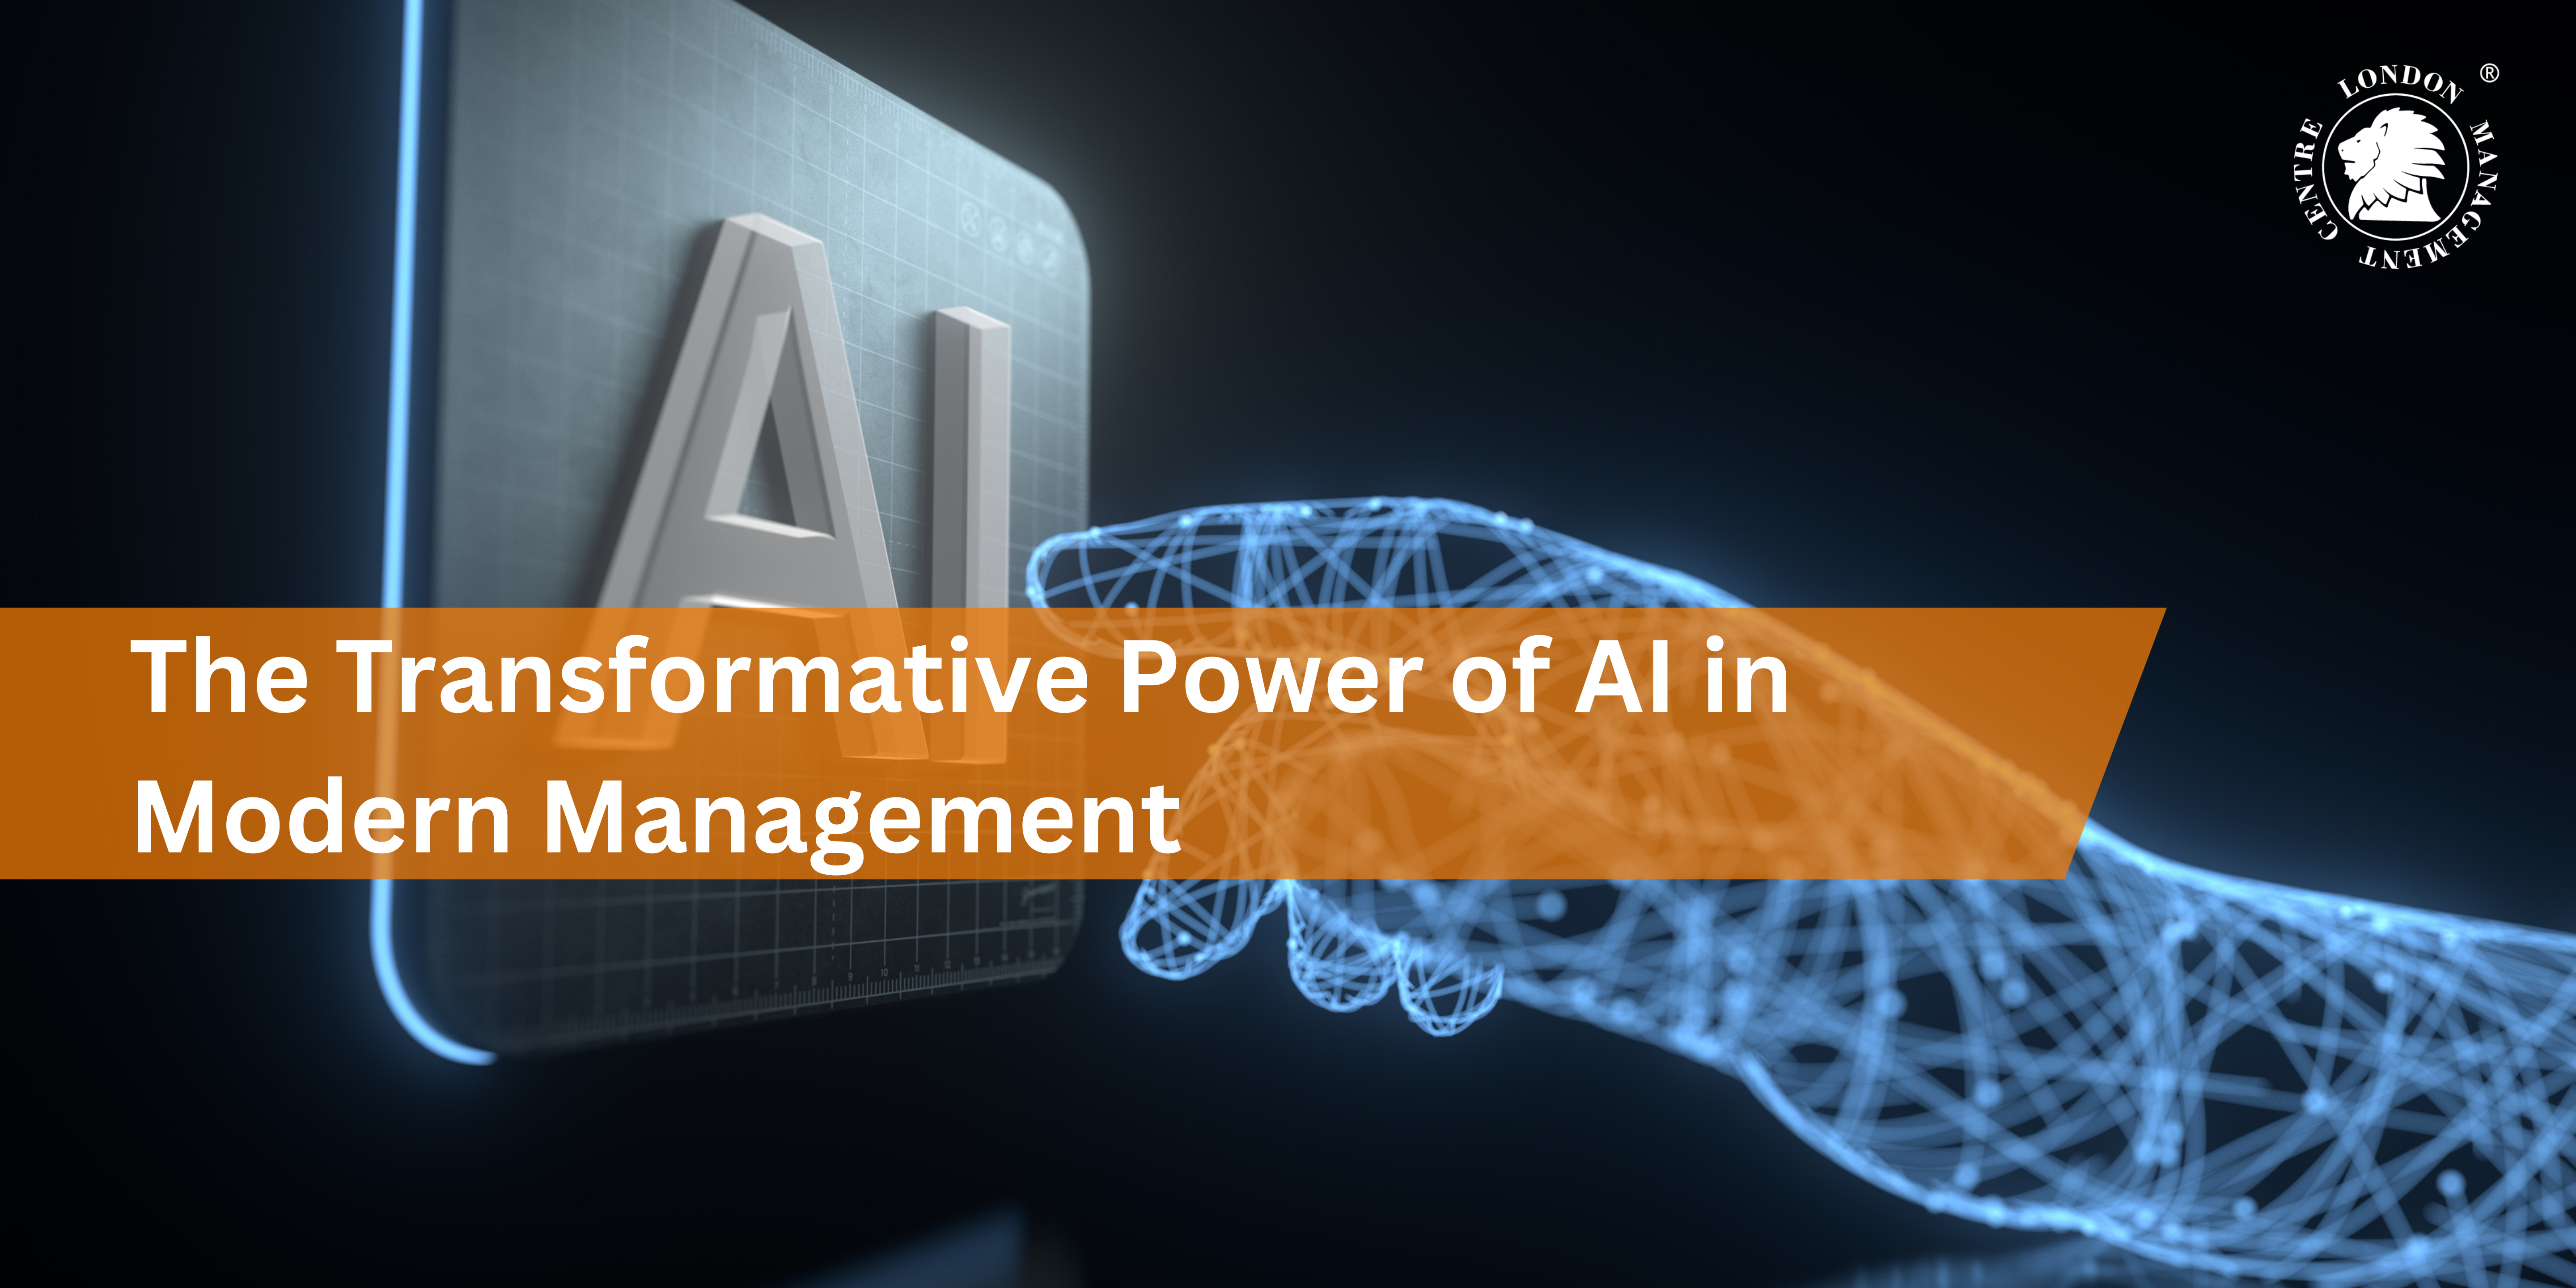 The Transformative Power of AI in Modern Management